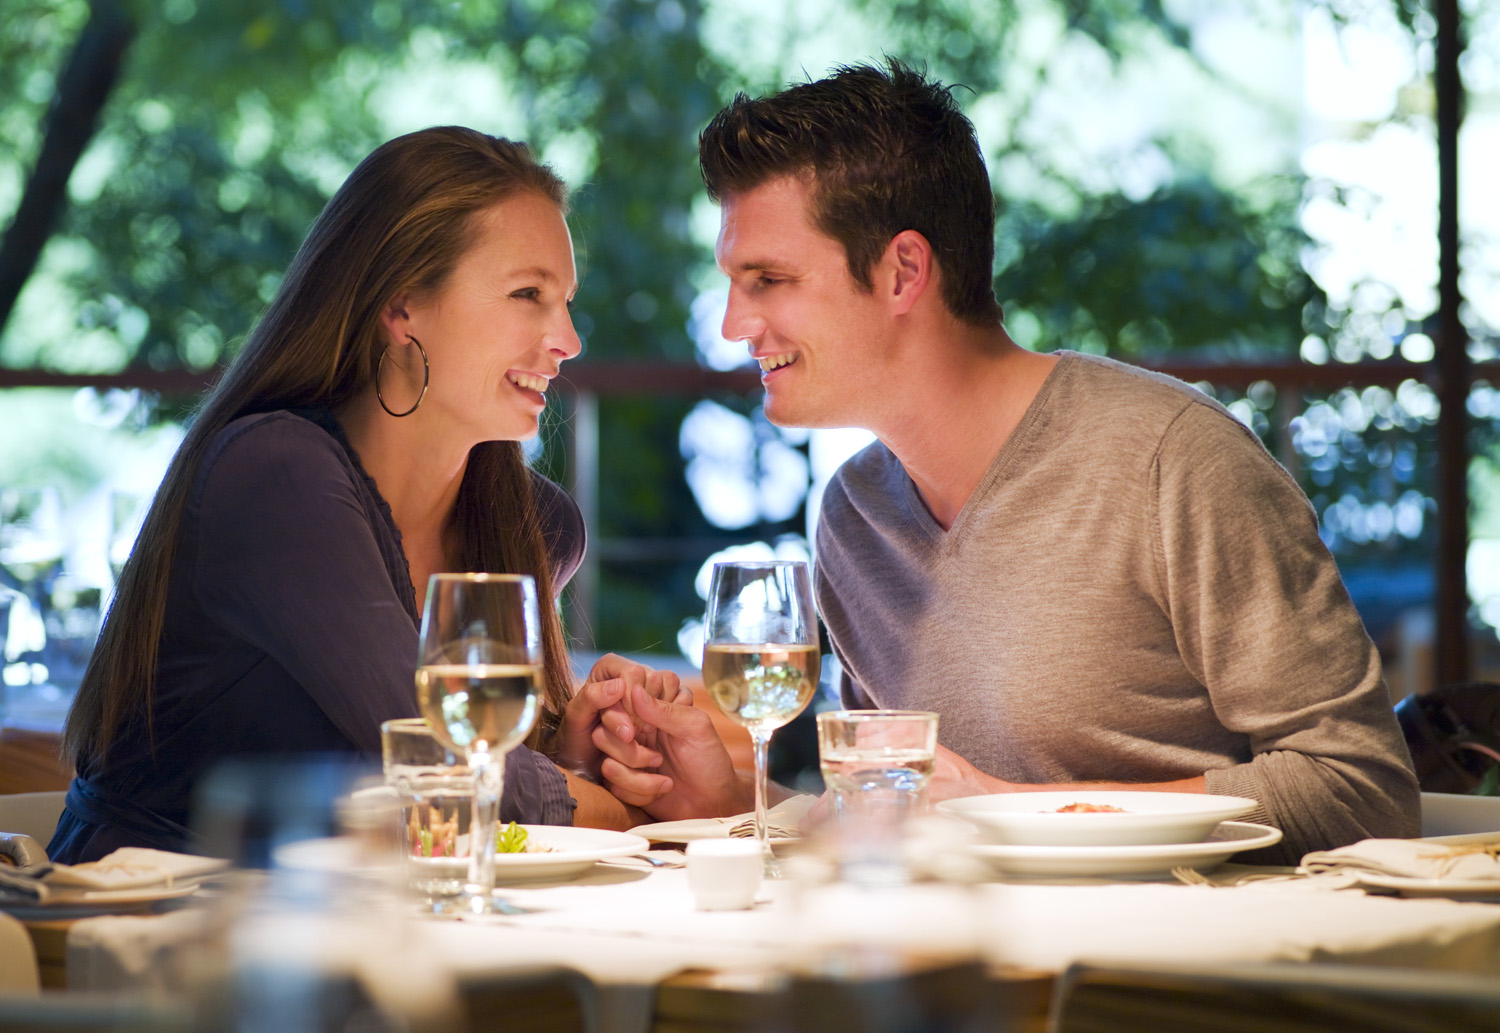 “Indulge Your Palate: Tips for Enjoying Fine Dining Experiences”